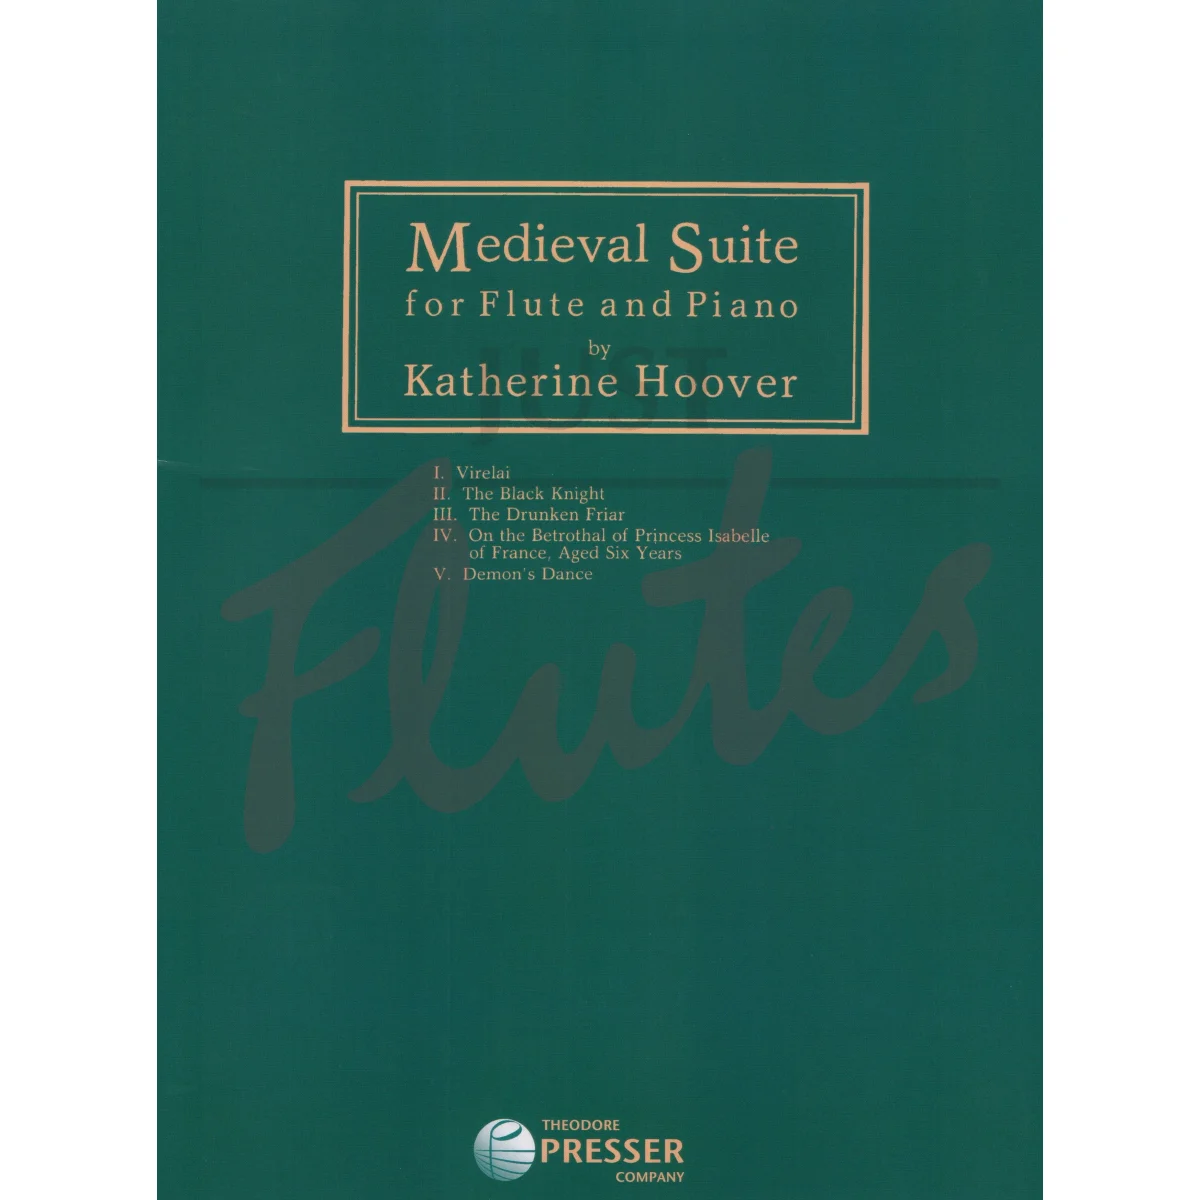 Medieval Suite for Flute and Piano